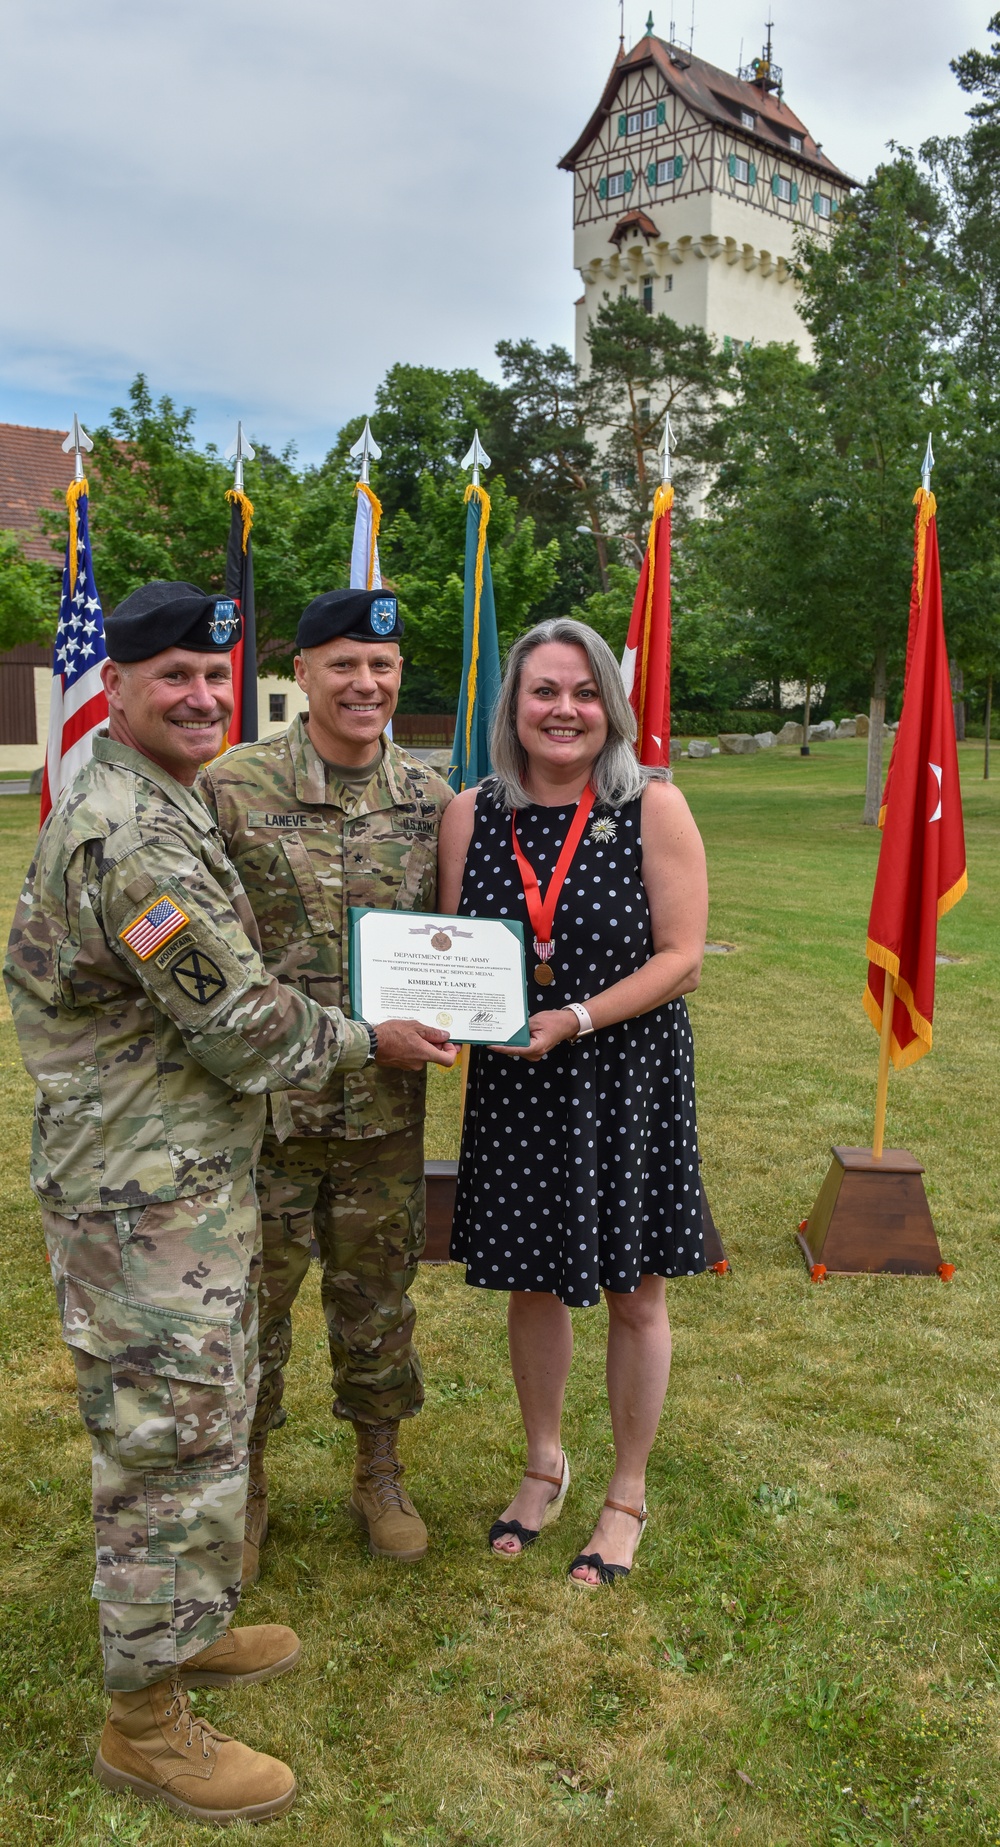 Lt. Gen. Christopher Cavoli awards Kimberly LaNeve with the Meritorious Public Service Medal